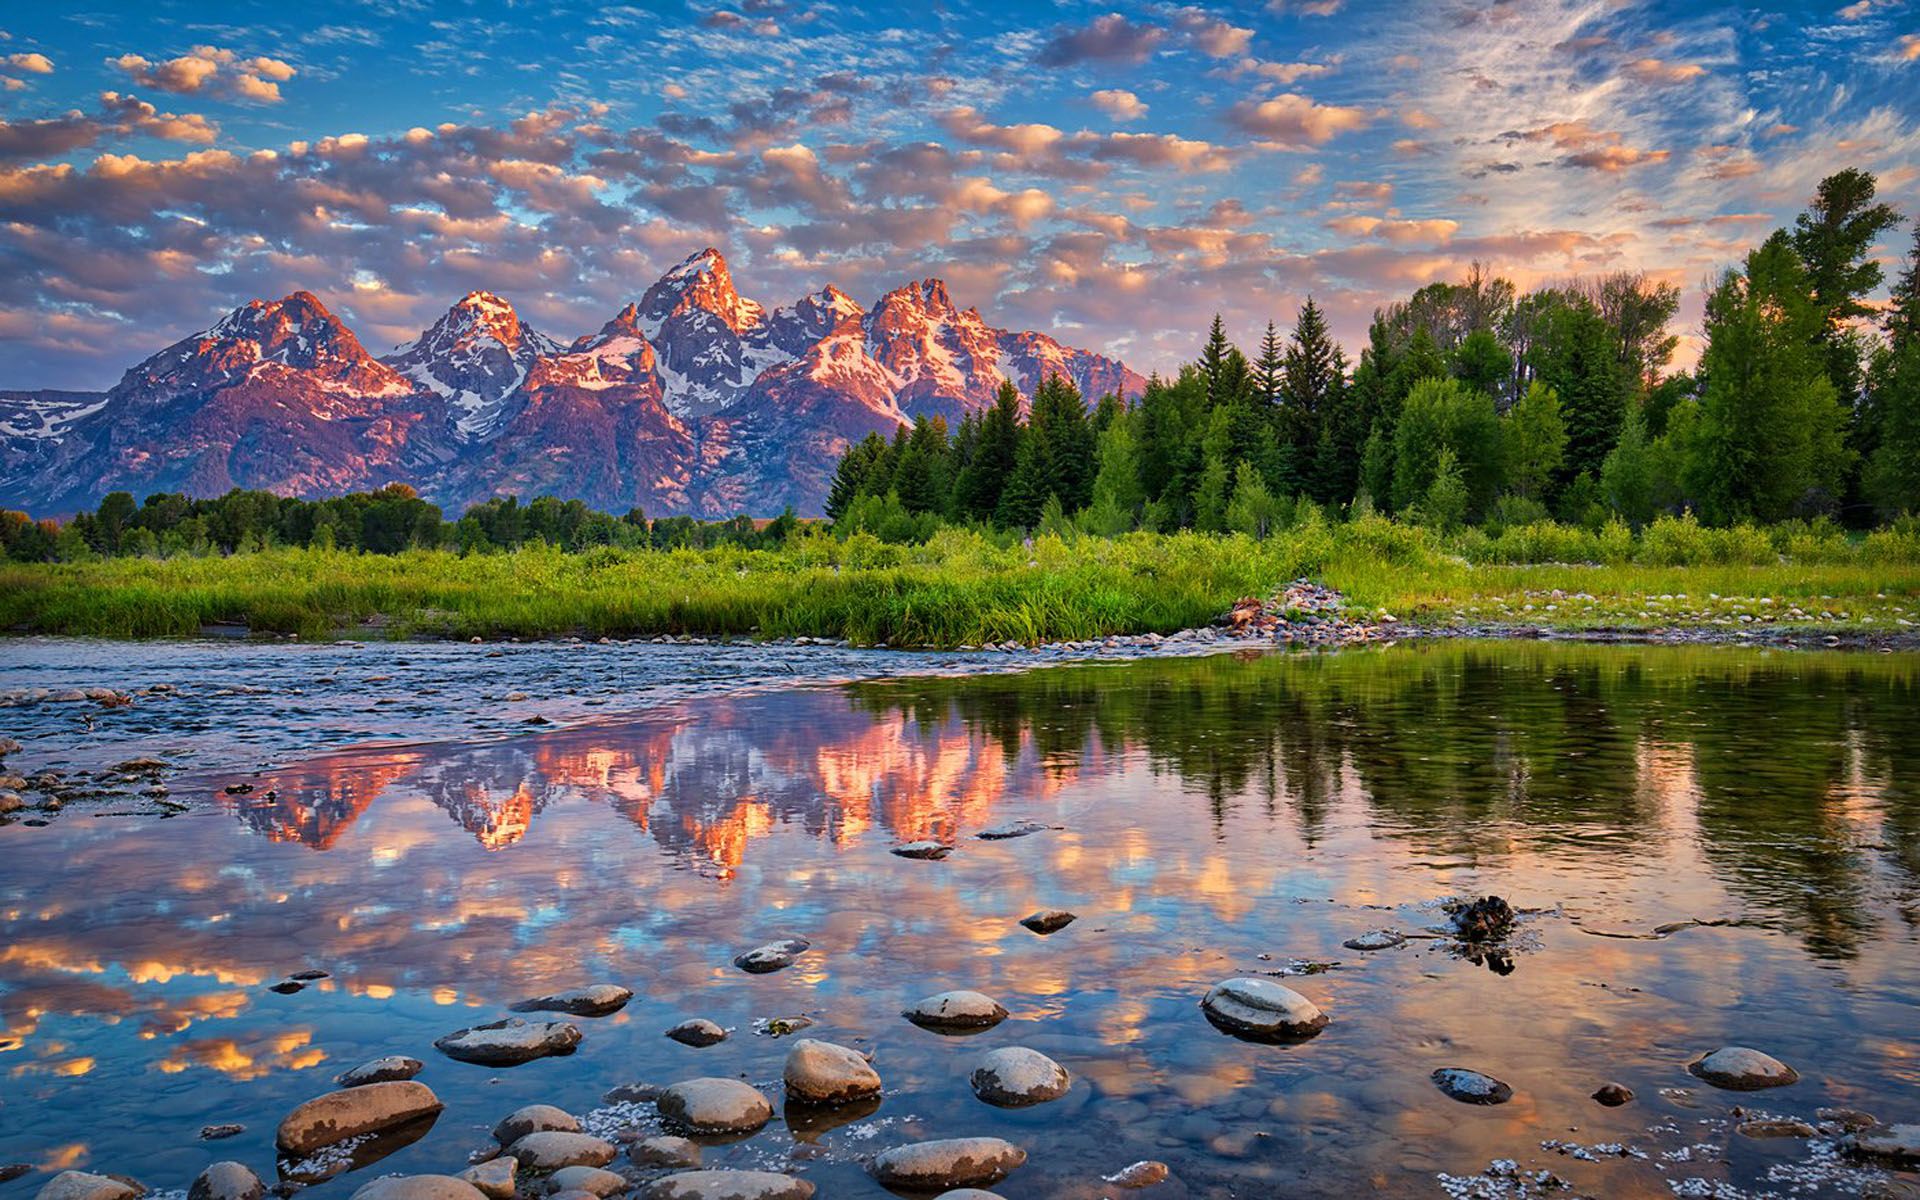 Spring In National Park Grand Teton Wyoming United States Of America Photo Landscape HD Wallpaper For Desktop Laptop And Mobile Phones, Wallpaper13.com